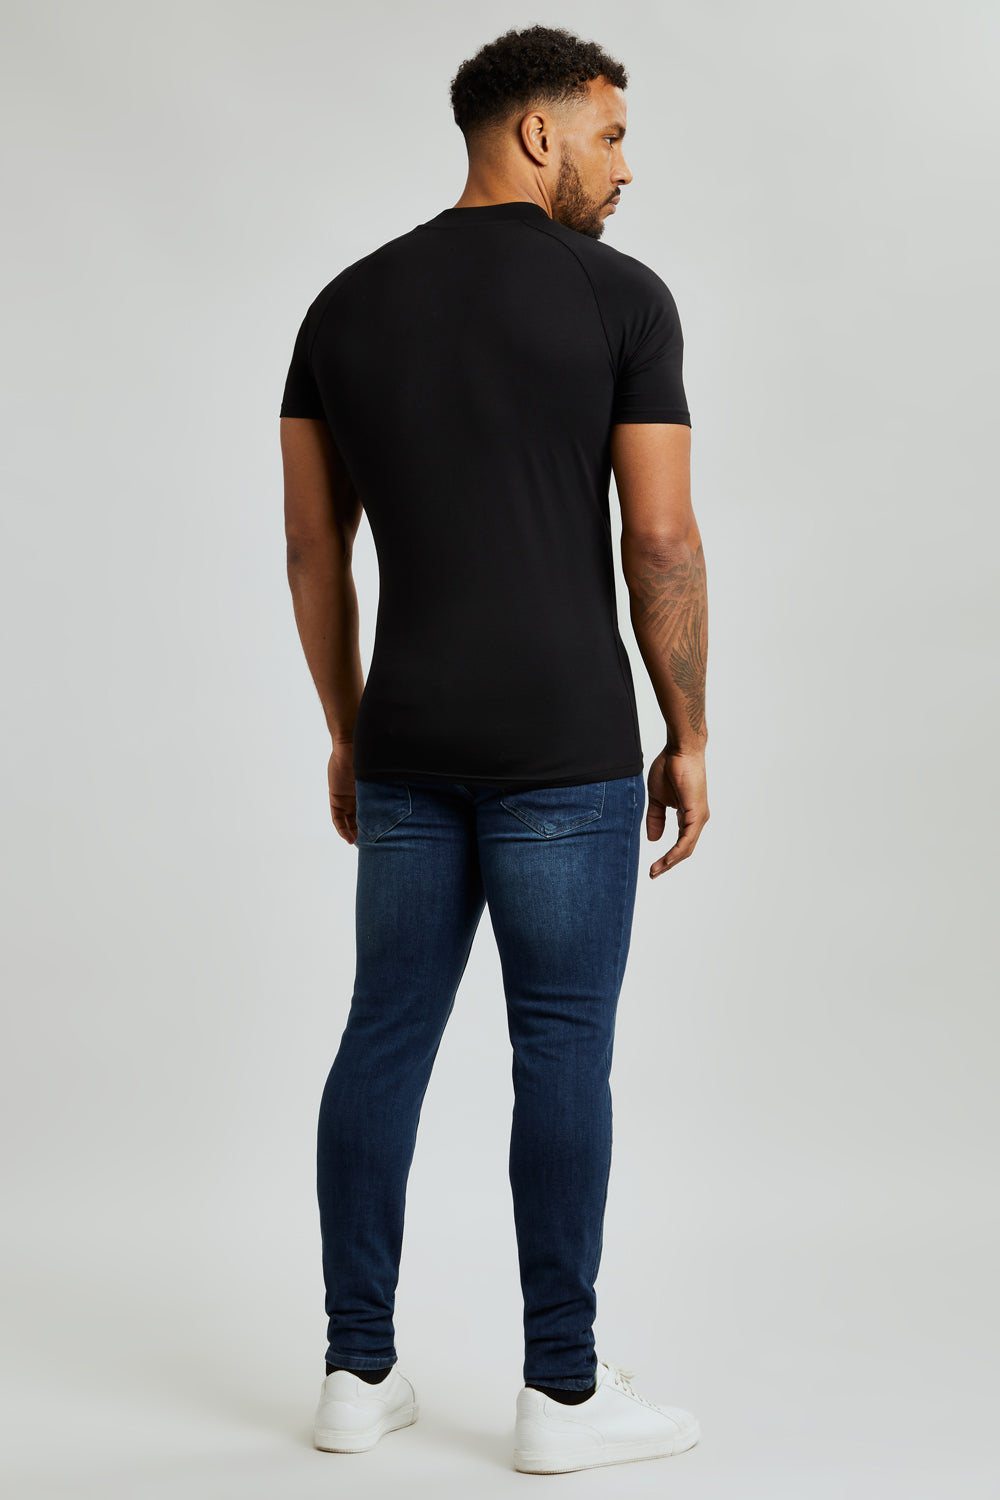 Tailored Athlete Athletic Fit Stretch T-Shirt, Black, S